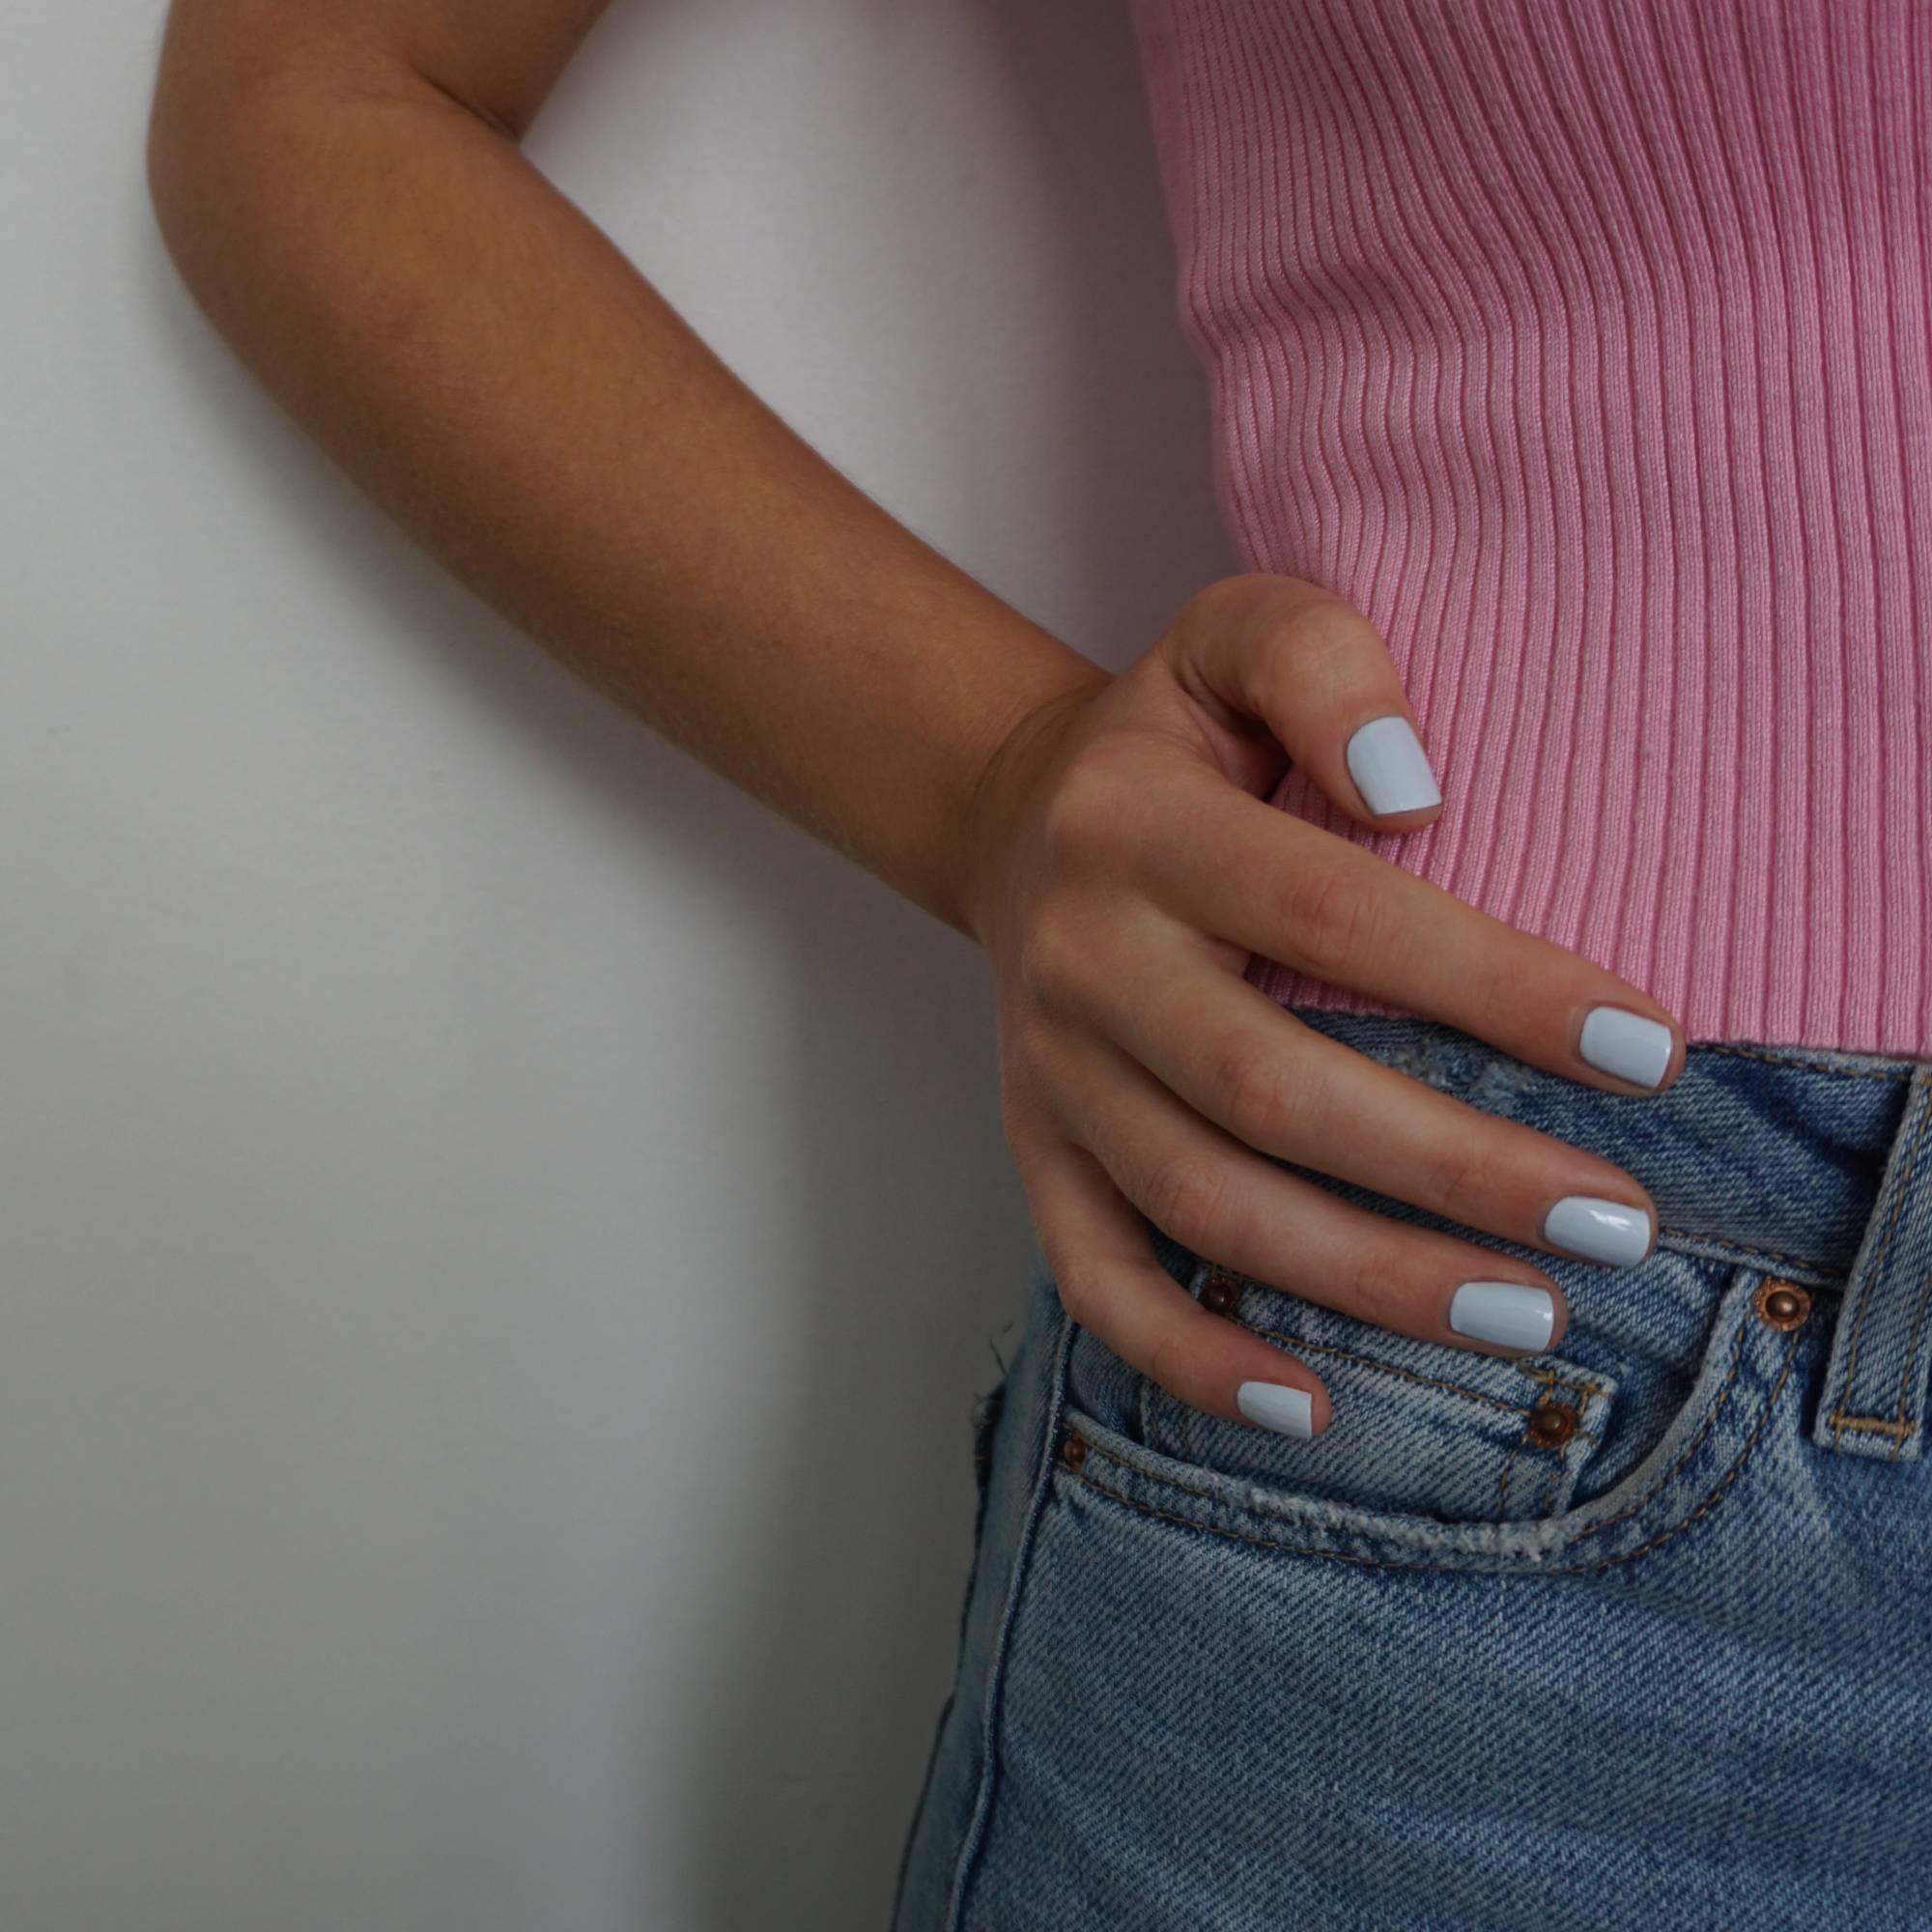 A female hand on hip, wearing Pale Glacier a baby blue nail polish, contrasting against her pink top and denim skirt.